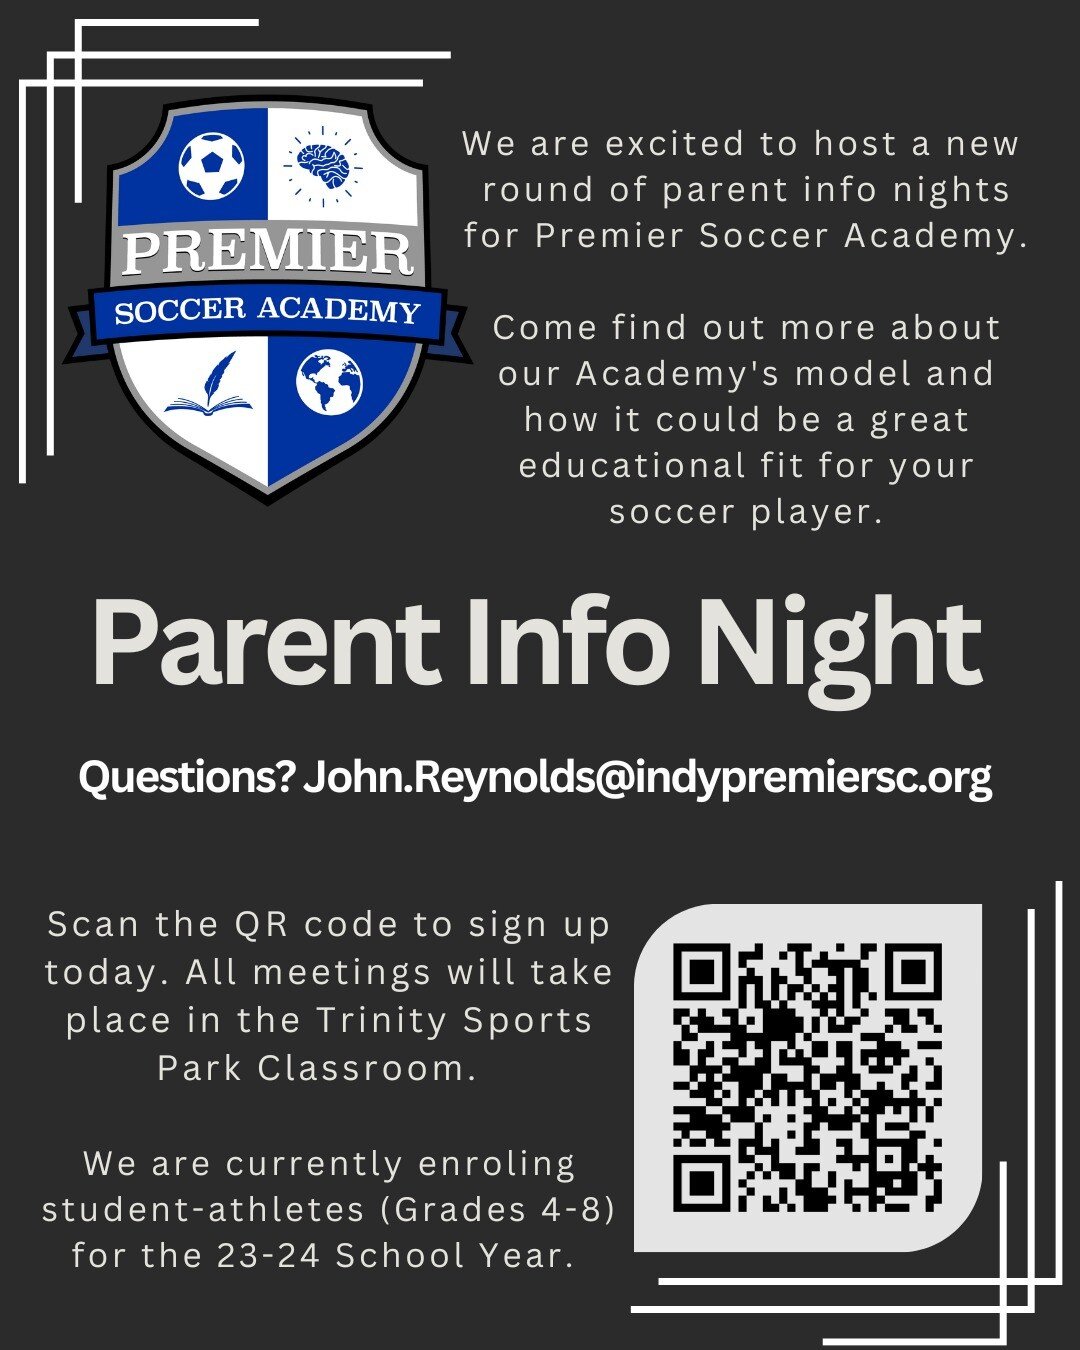 Sign up to learn more about our academy at one of our parent info nights!

Enrolling now! premiersocceracademy.org
#schoolisinsession
@indypremiersc